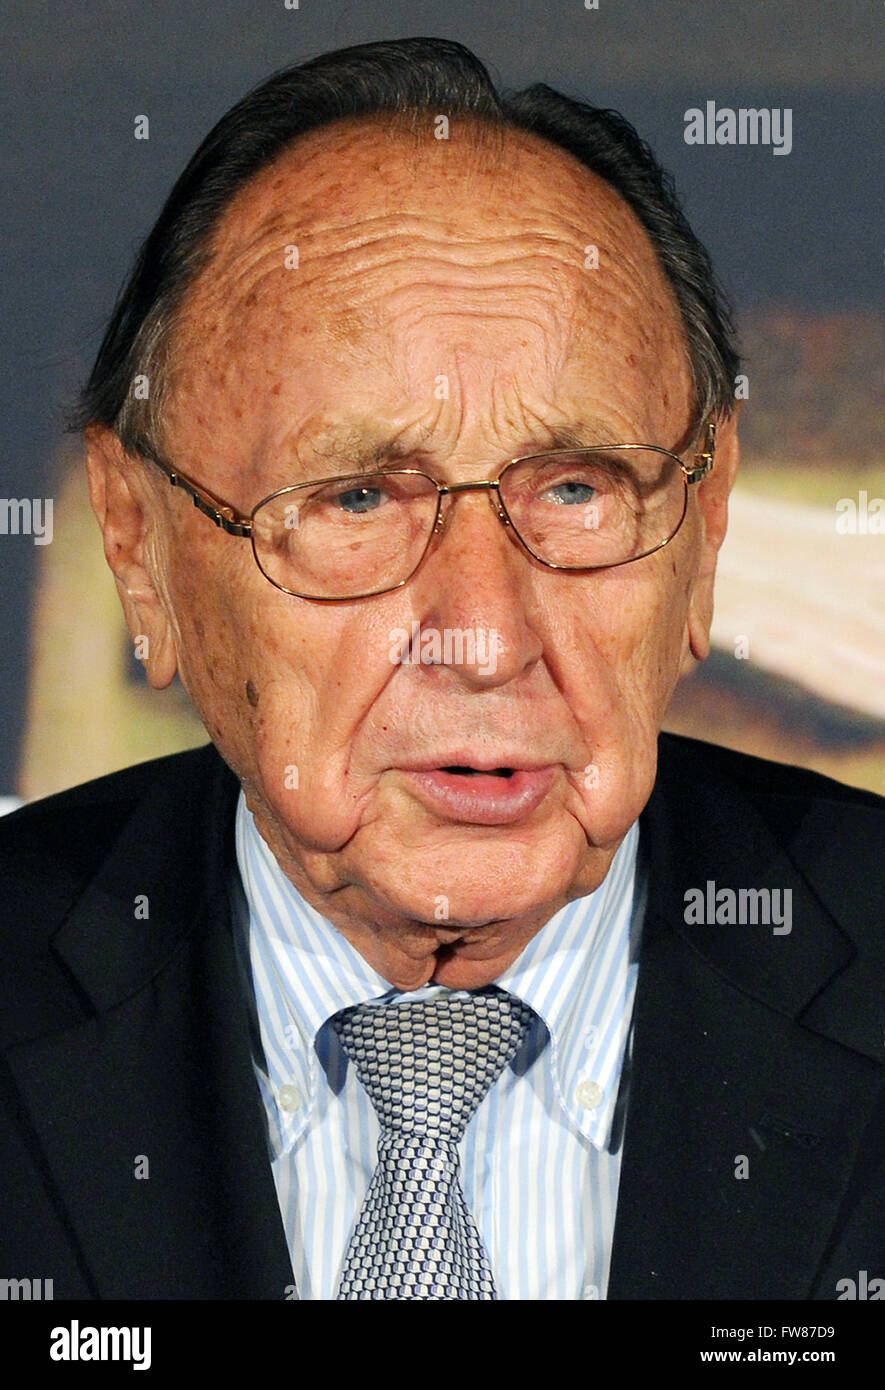 Former foreign minister Hans-Dietrich Genscher (FDP) at the film premiere of 'Jenseits der Mauer' on 09 September 2009. Stock Photo